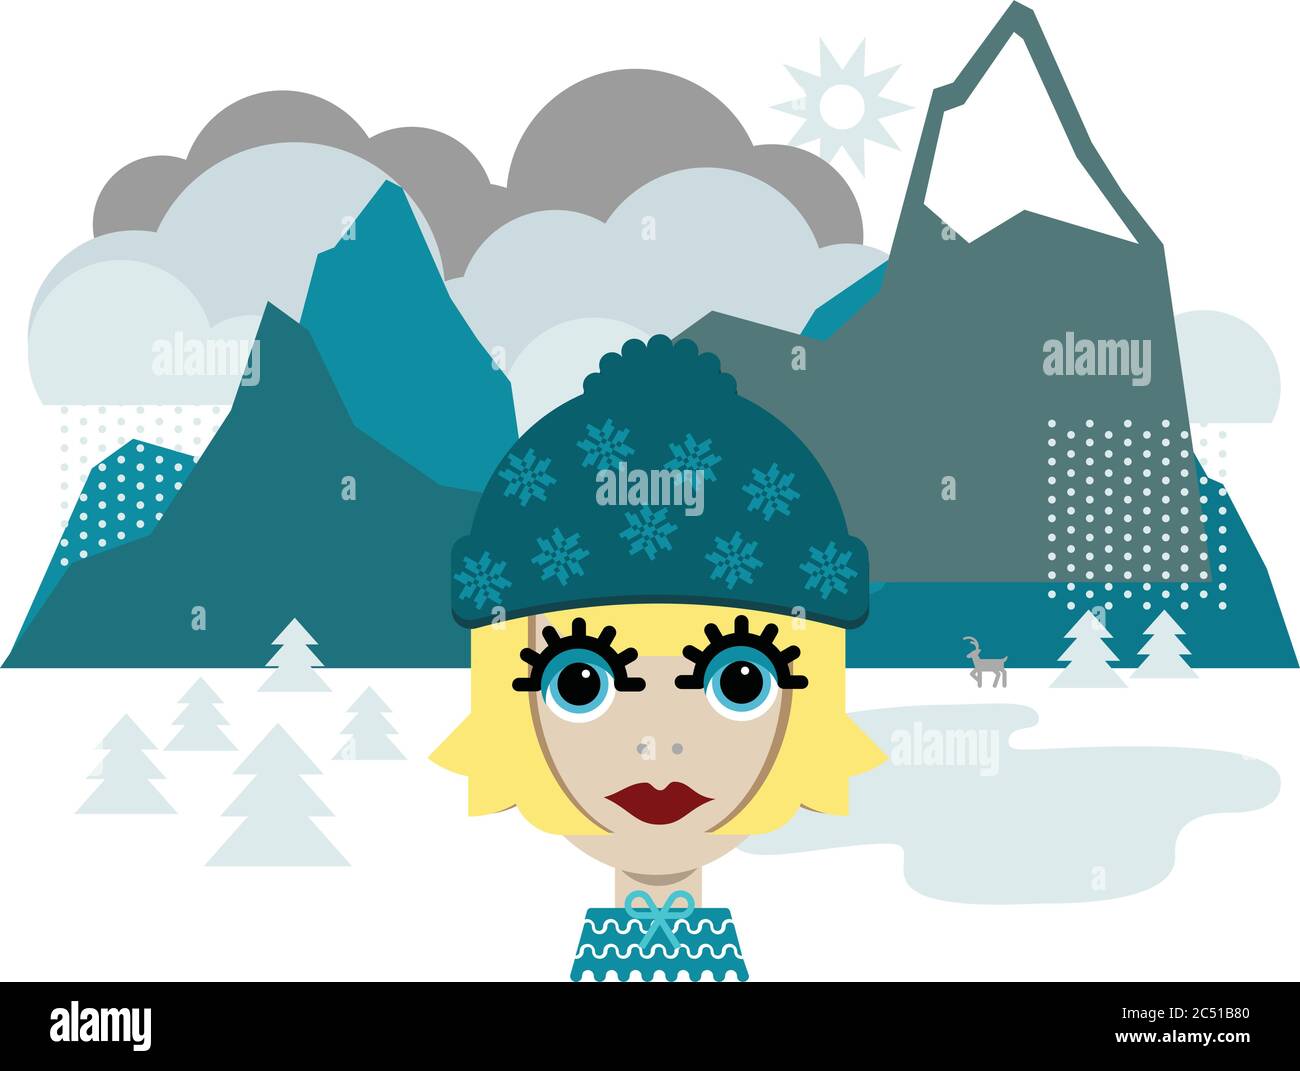 Blonde woman wearing a hat walking in the snow with mountains and snow falling Stock Vector